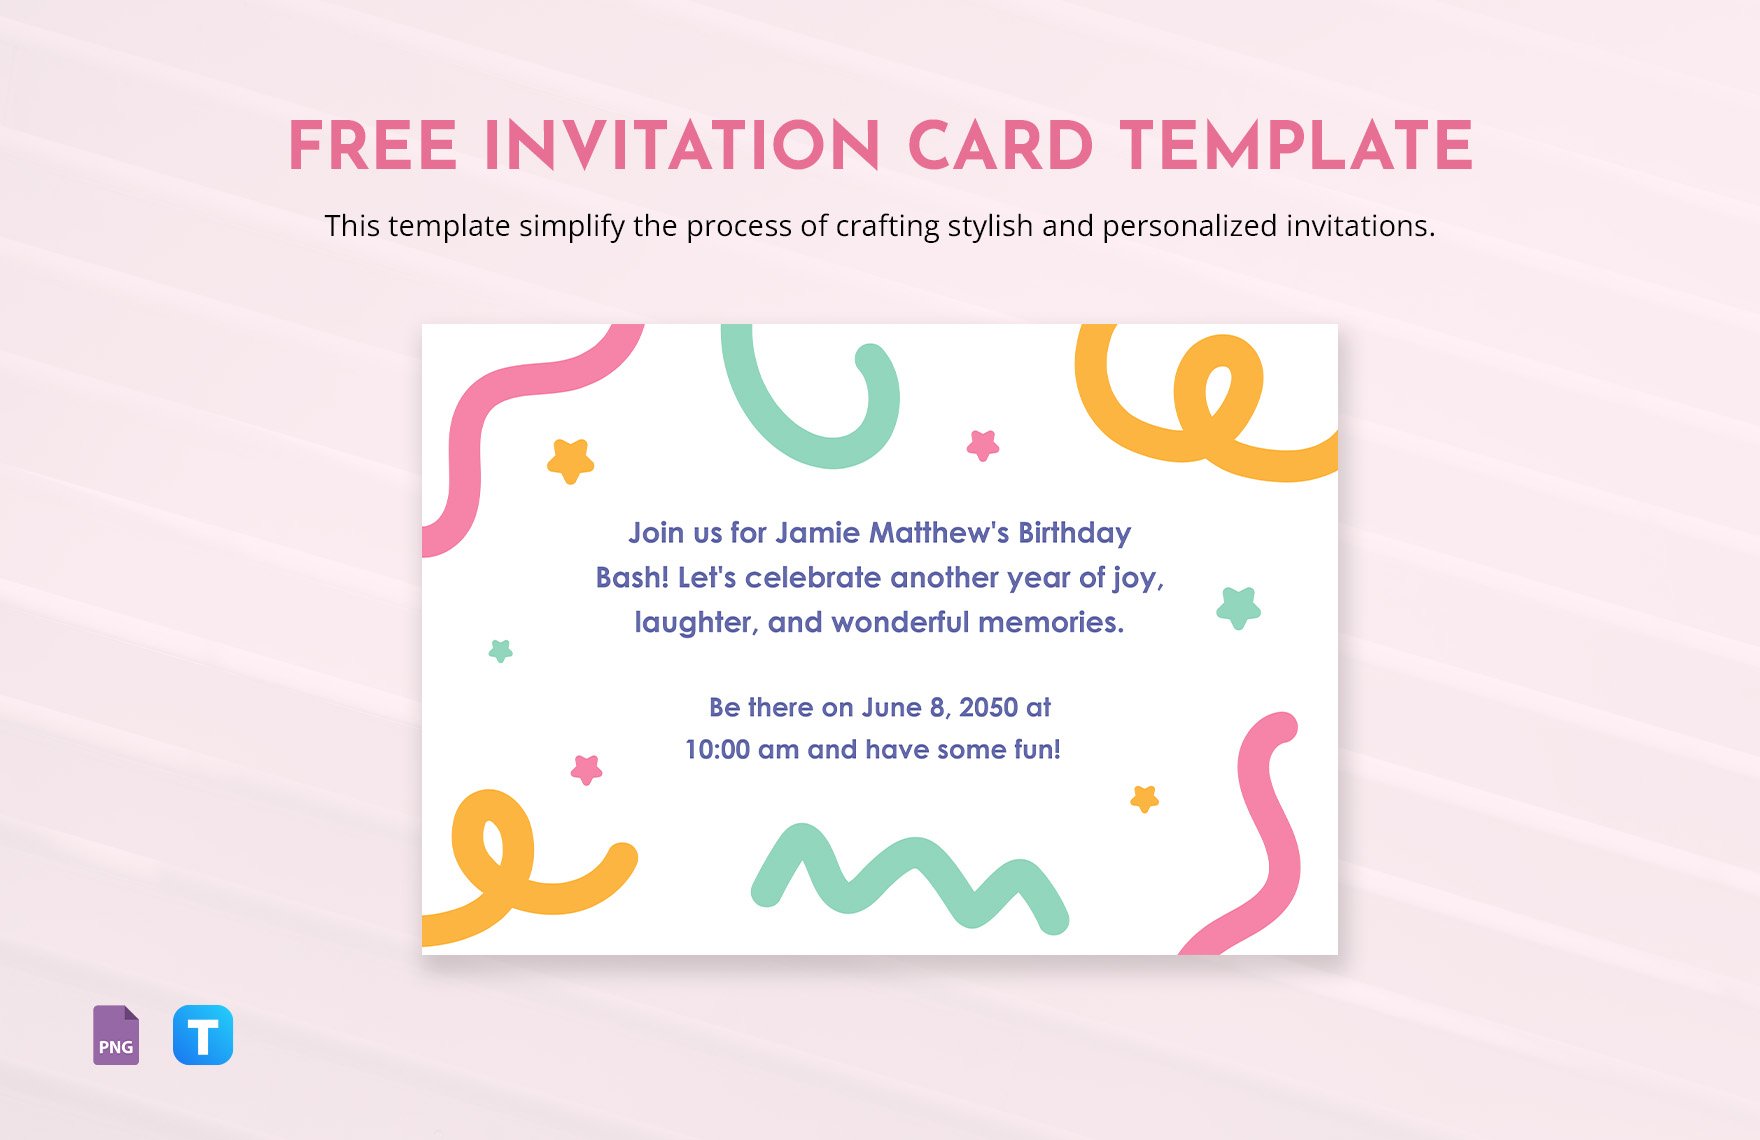 Invitation Card Template in PNG